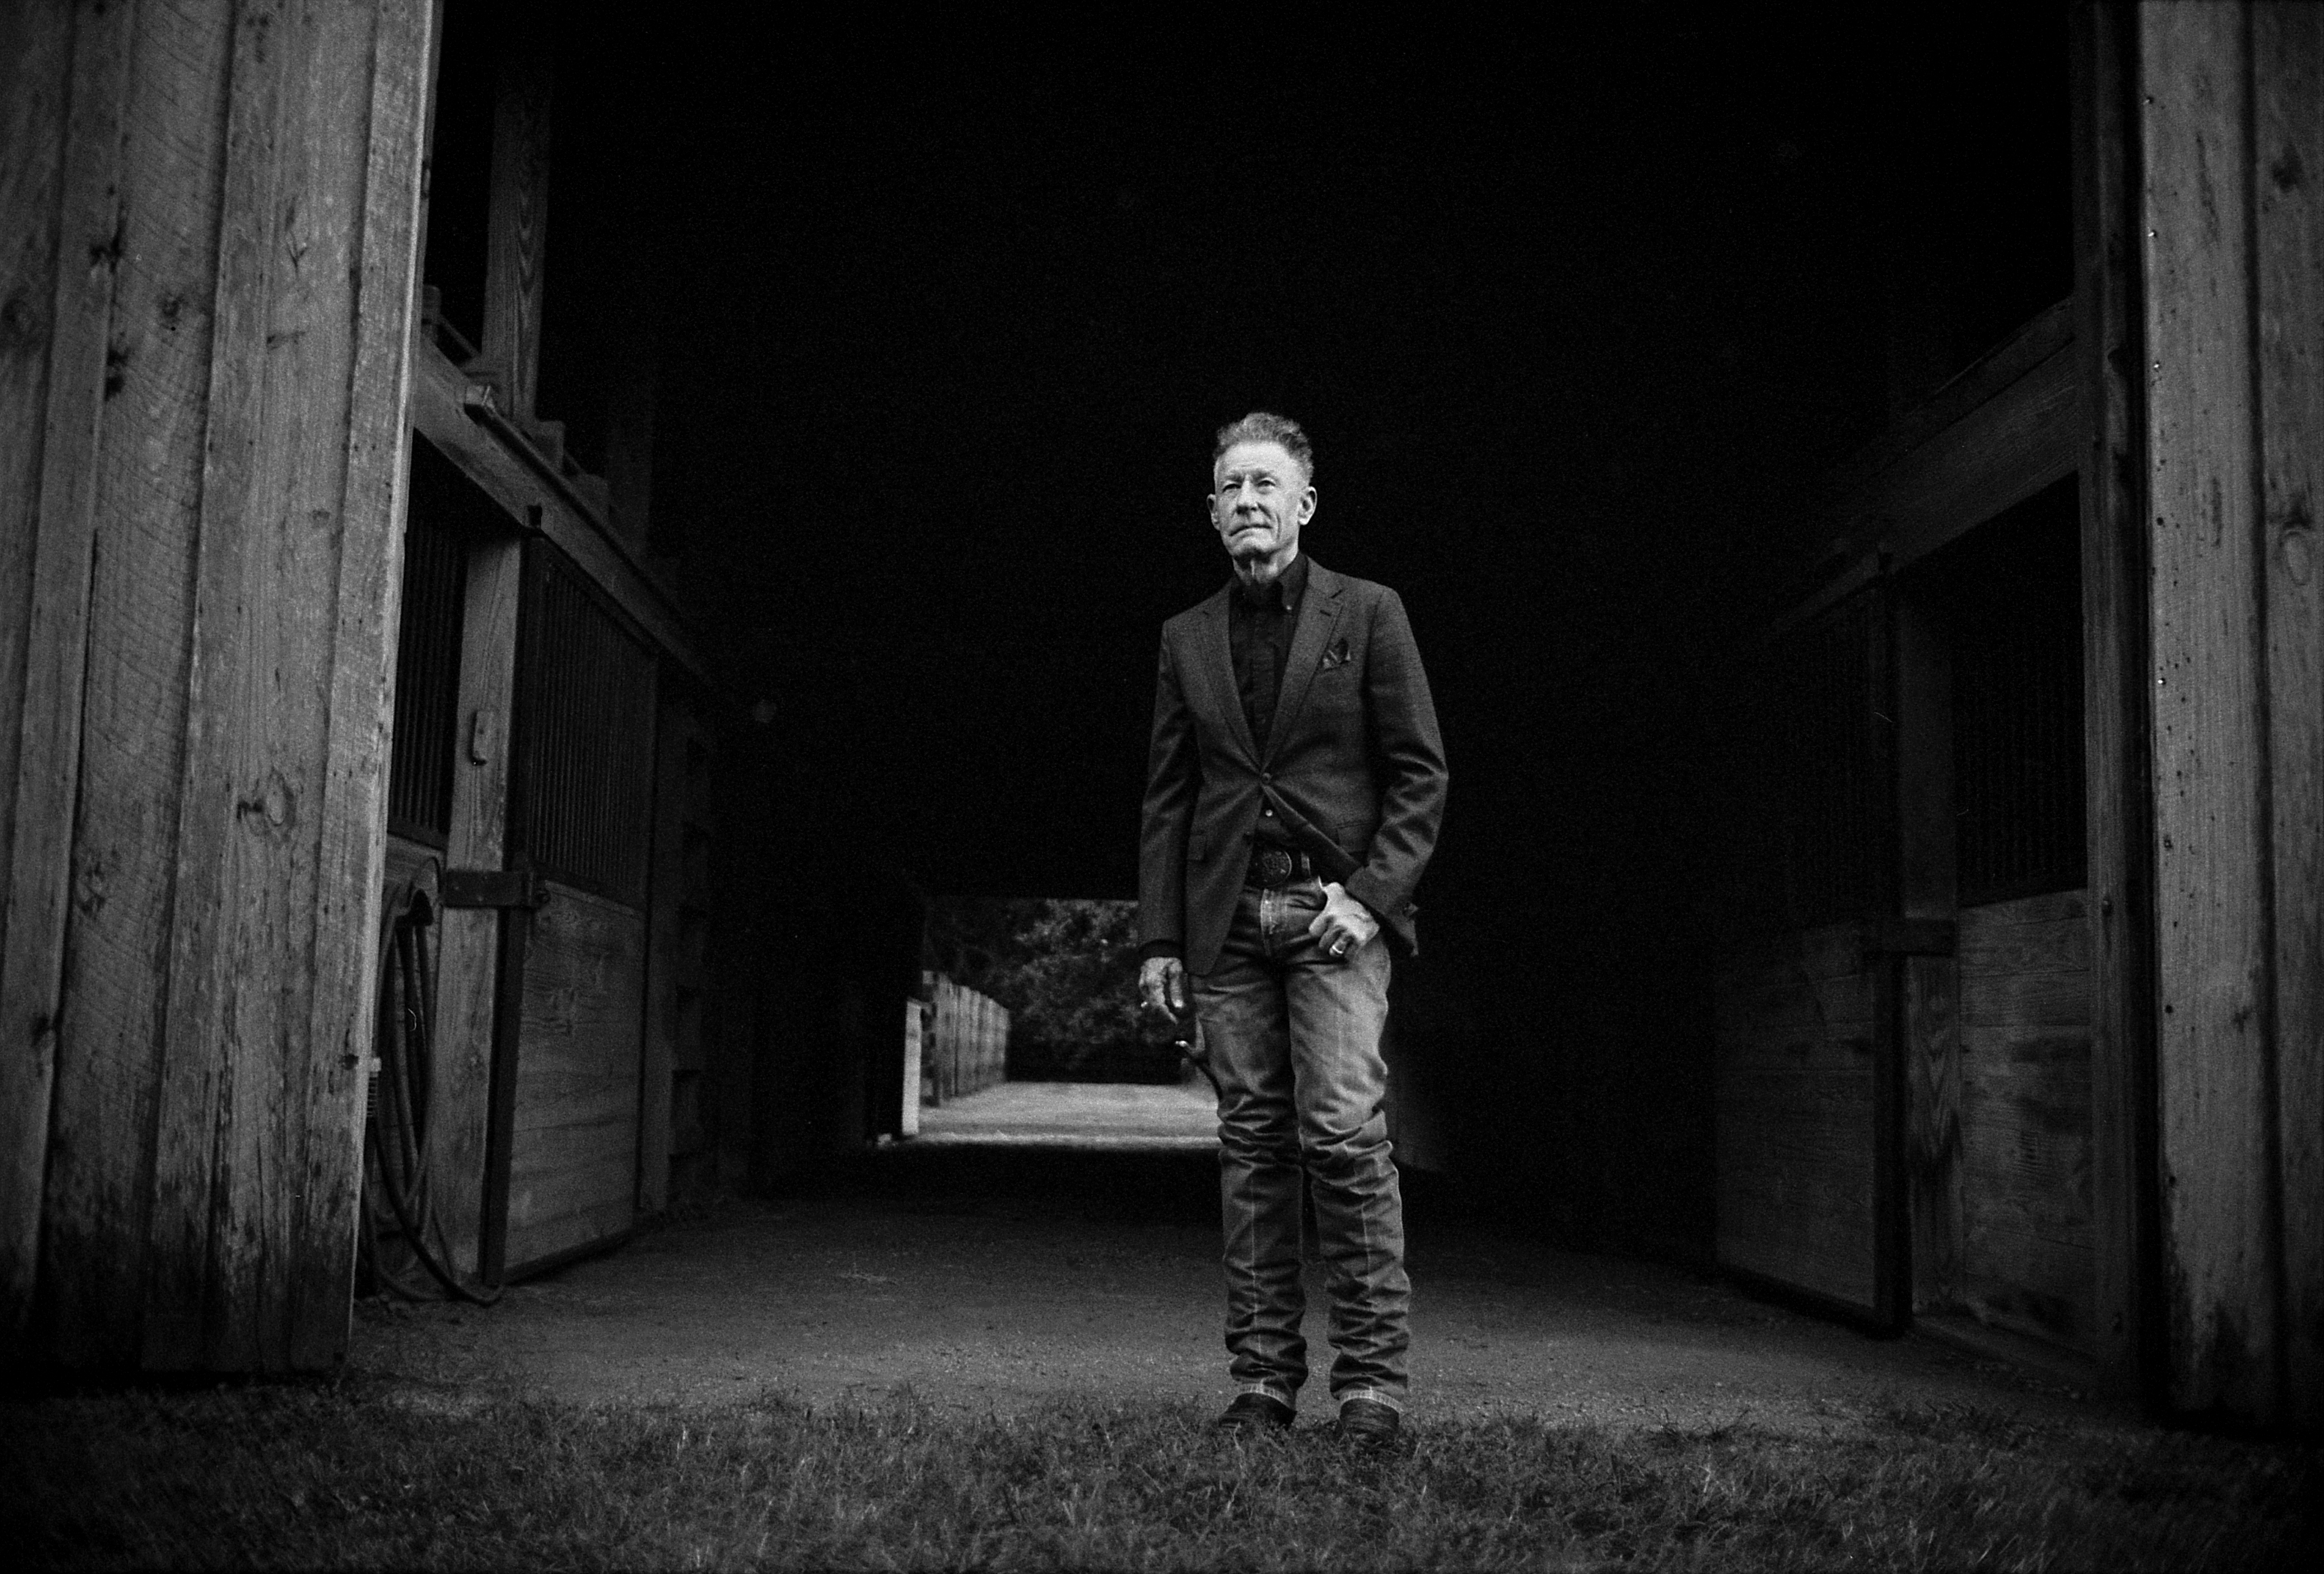 Lyle Lovett, in jeans and a button-up jacket, stands inside a horse barn